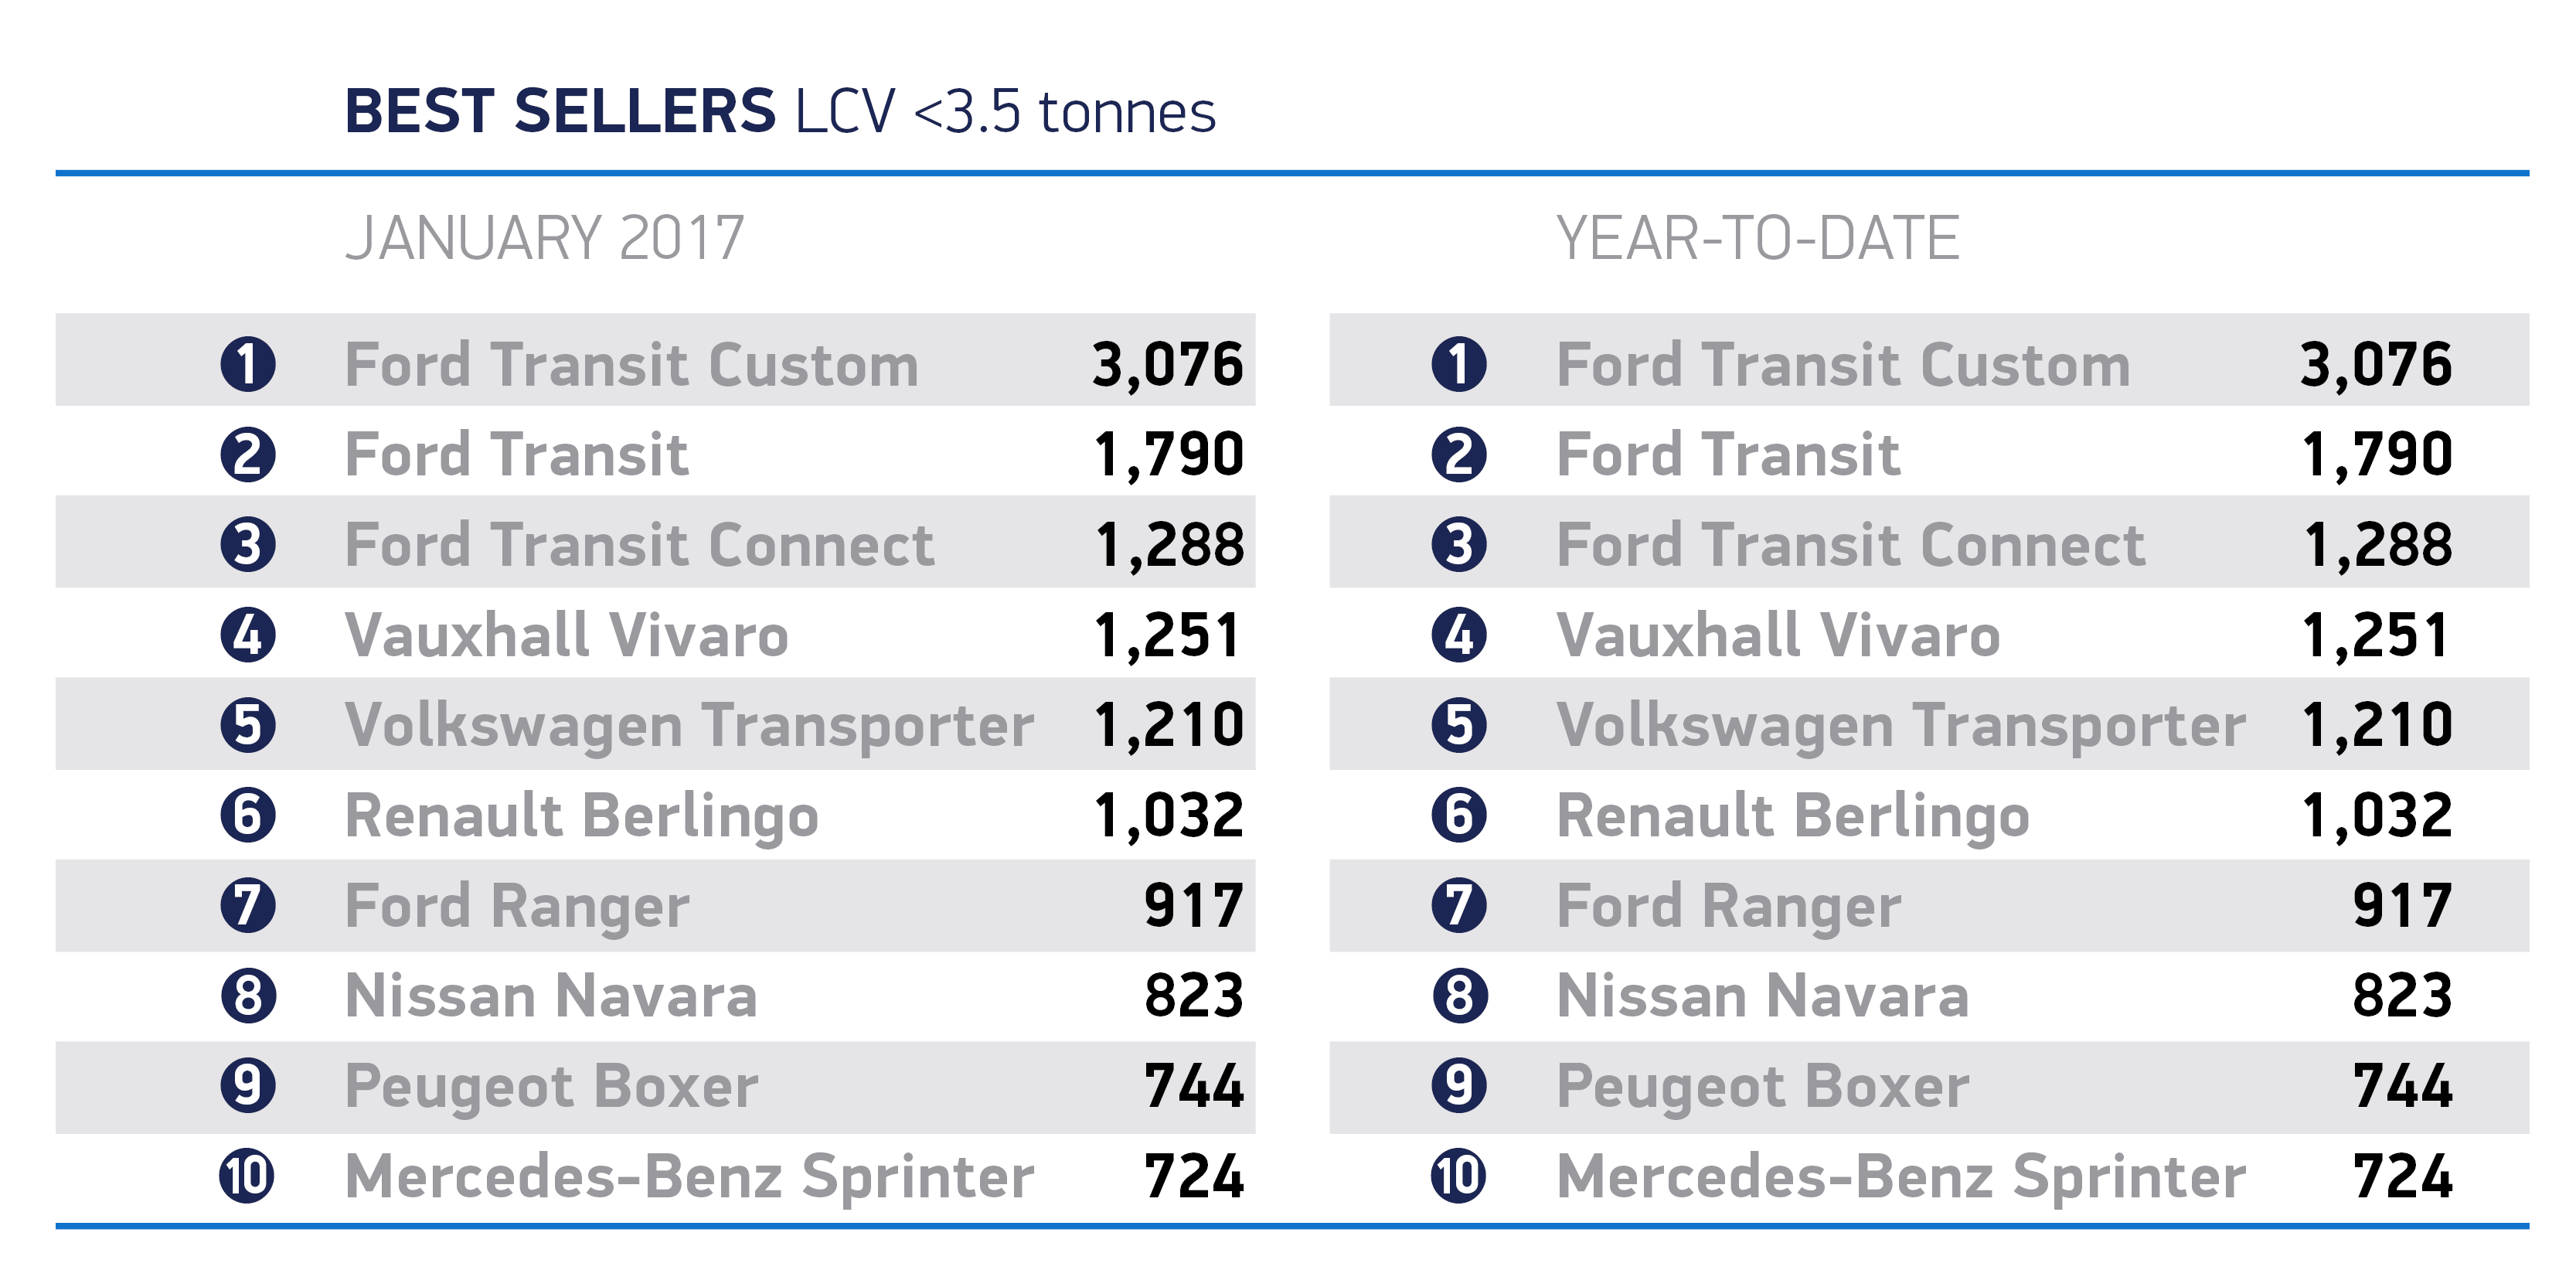 Small growth in January van registrations